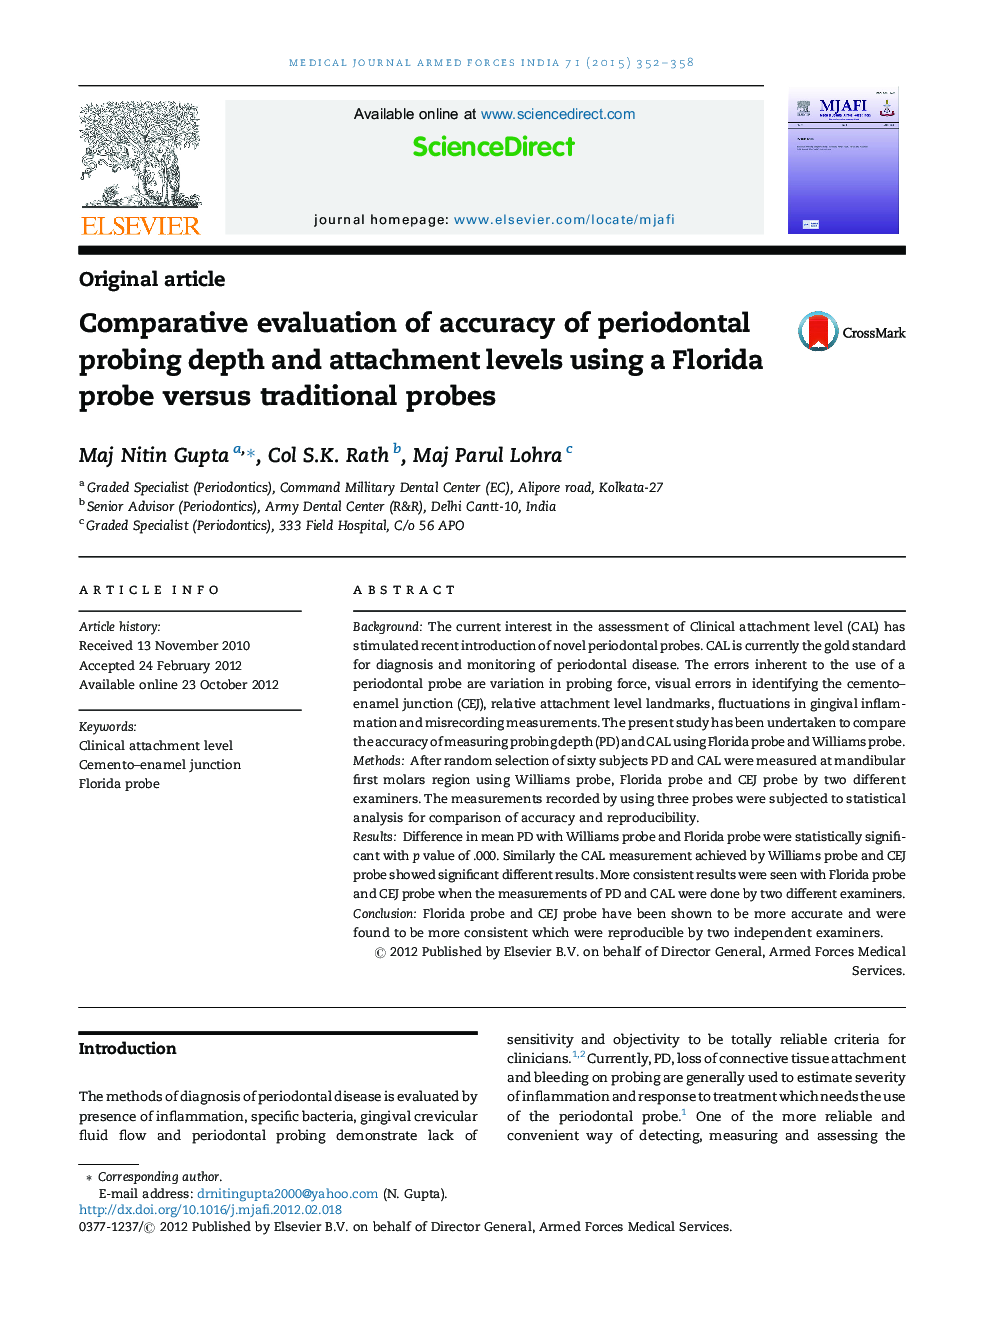 Comparative evaluation of accuracy of periodontal probing depth and attachment levels using a Florida probe versus traditional probes